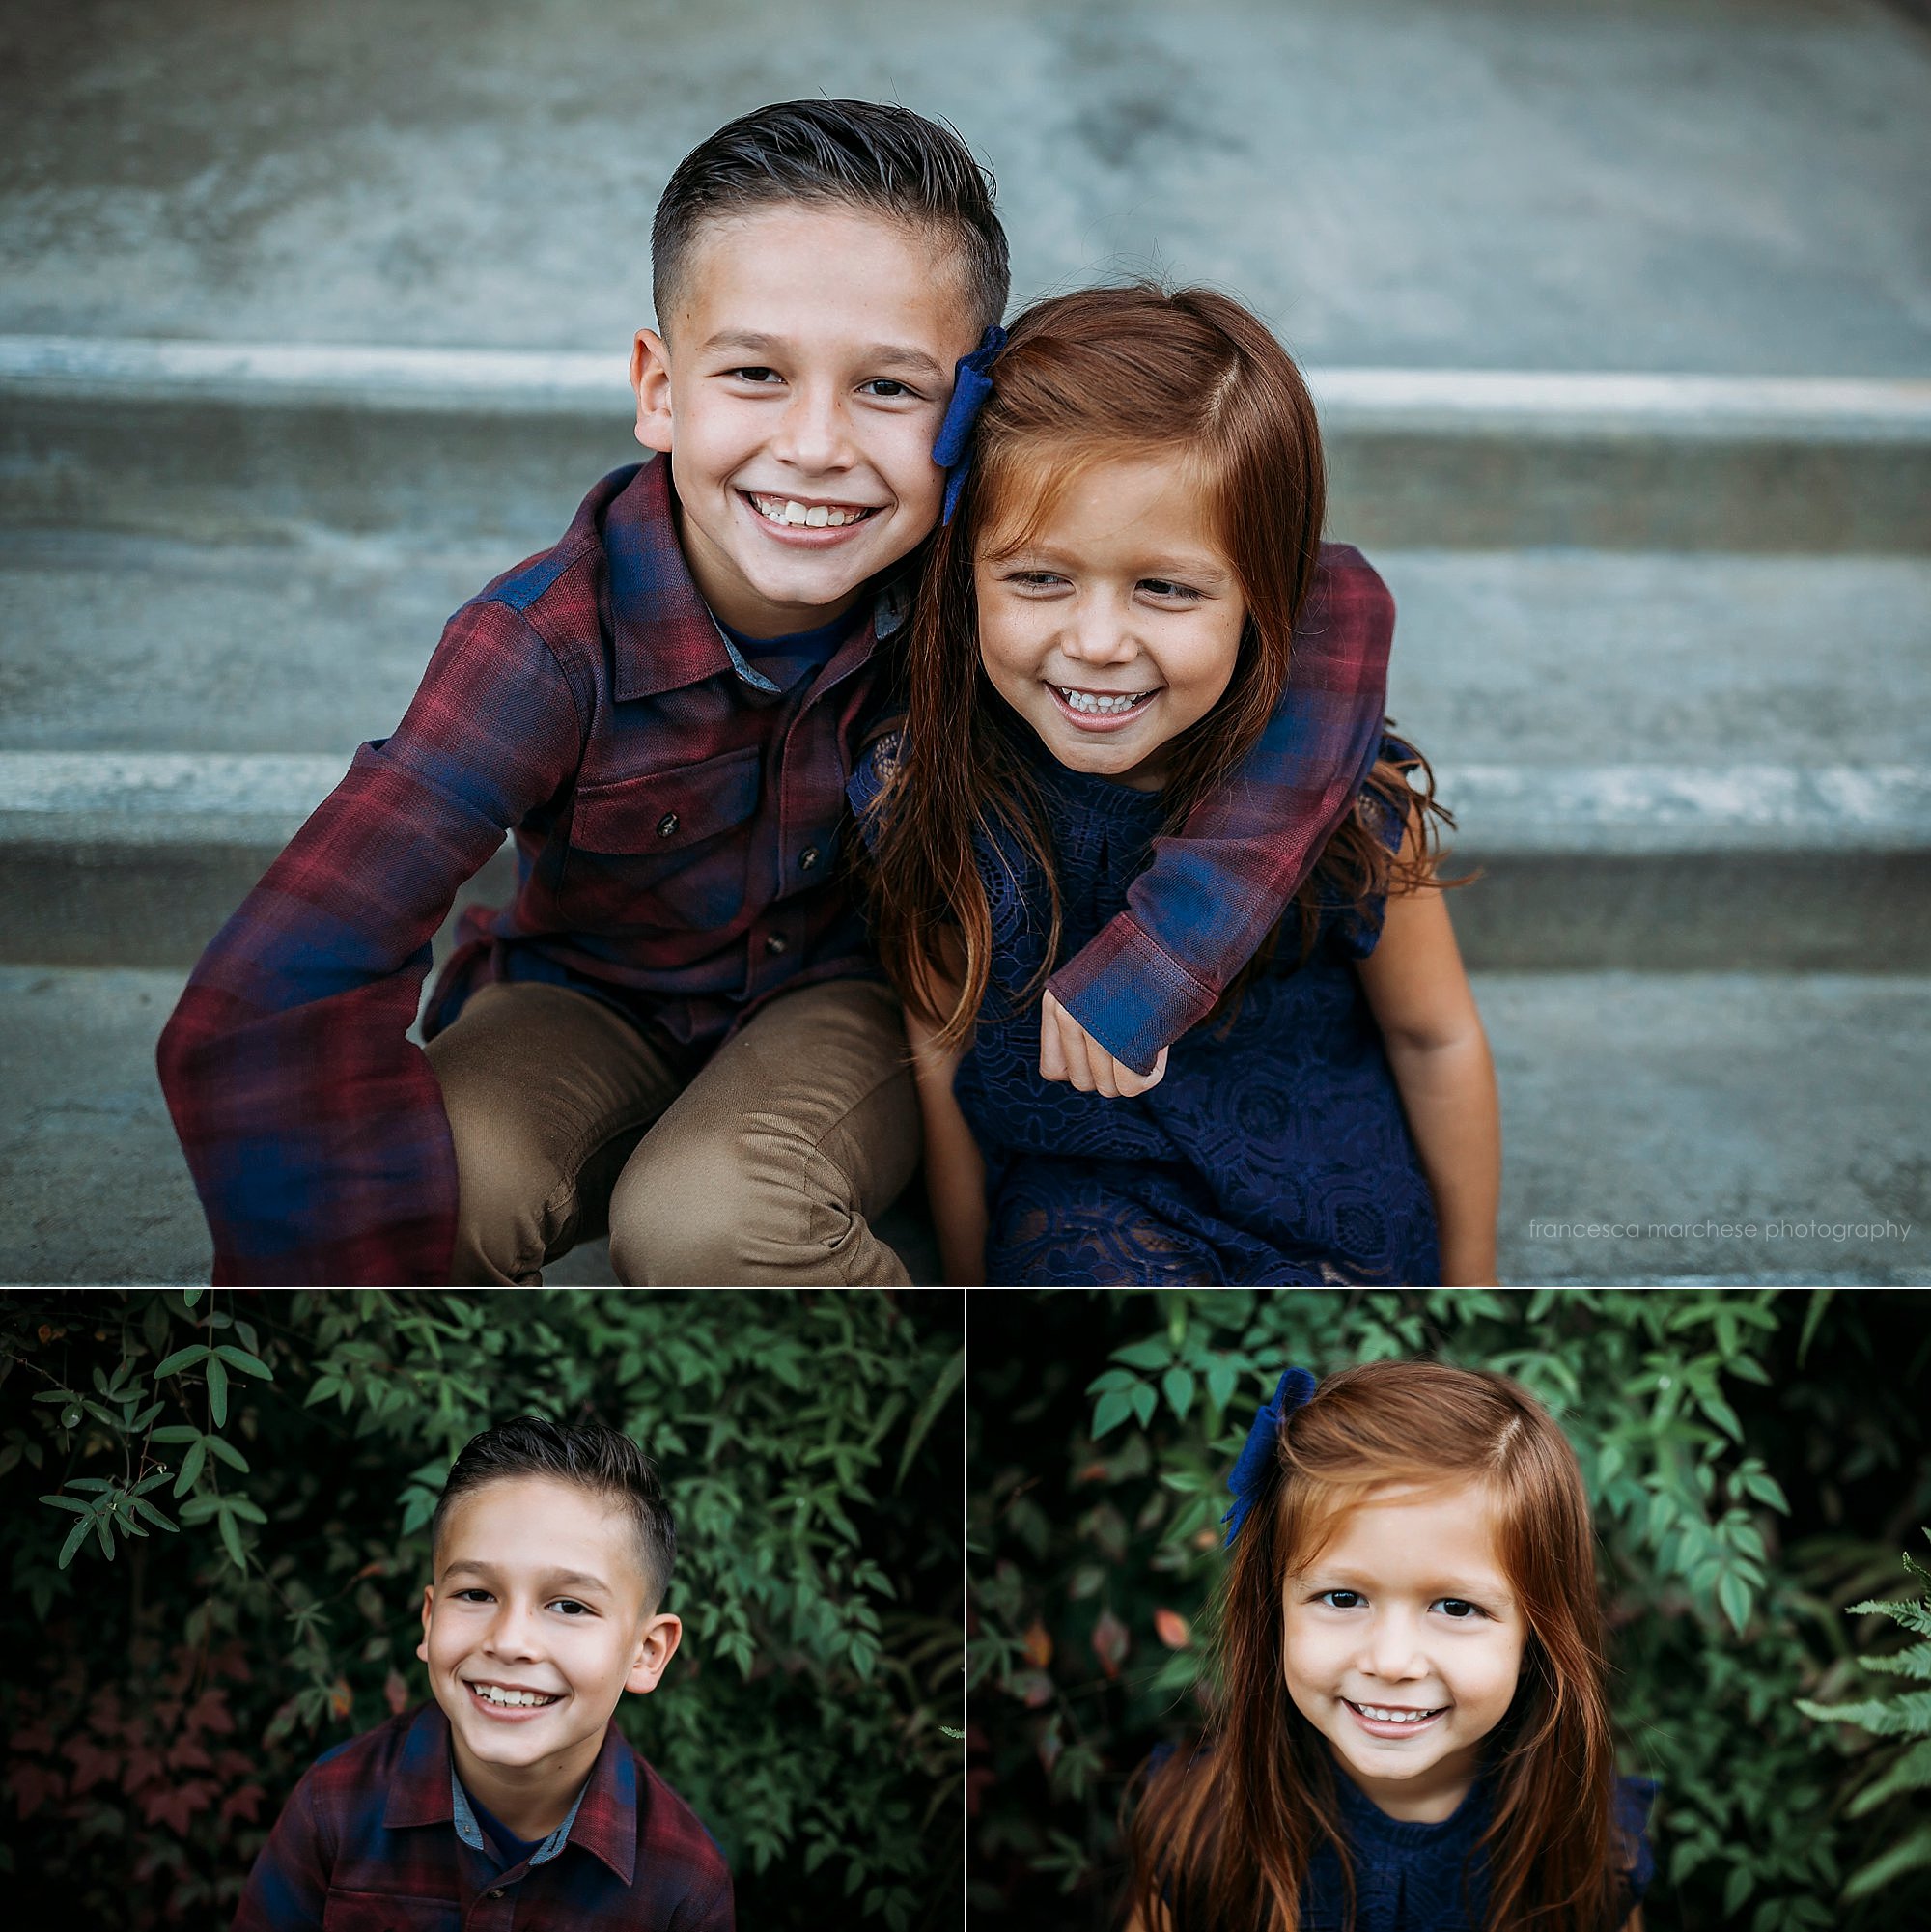 Thomas Family Francesca Marchese Photography Long Beach Orange County family photographer urban fall family session siblings and child portraits